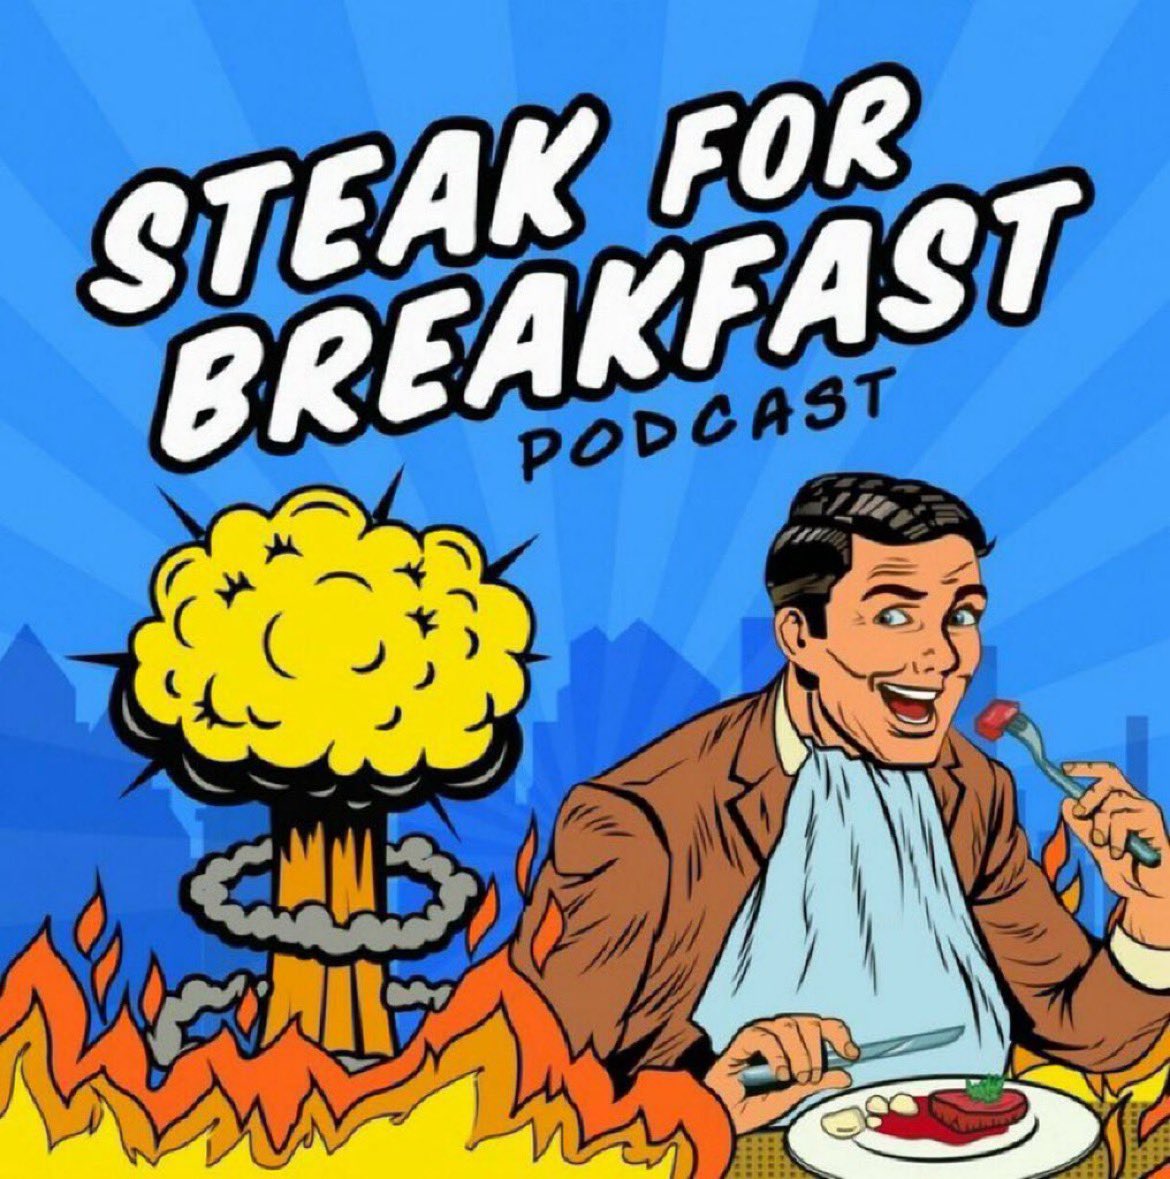 America’s Favorite & Fast Growing Political Podcast is: Steak for Breakfast 🥩🎙️ • Accurate Commentary • Impactful Analysis • The Best America First Guests FOUR Episodes a week • No Pay Wall • All-America First when you +FOLLOW on Apple Pods 🎧 podcasts.apple.com/us/podcast/ste…